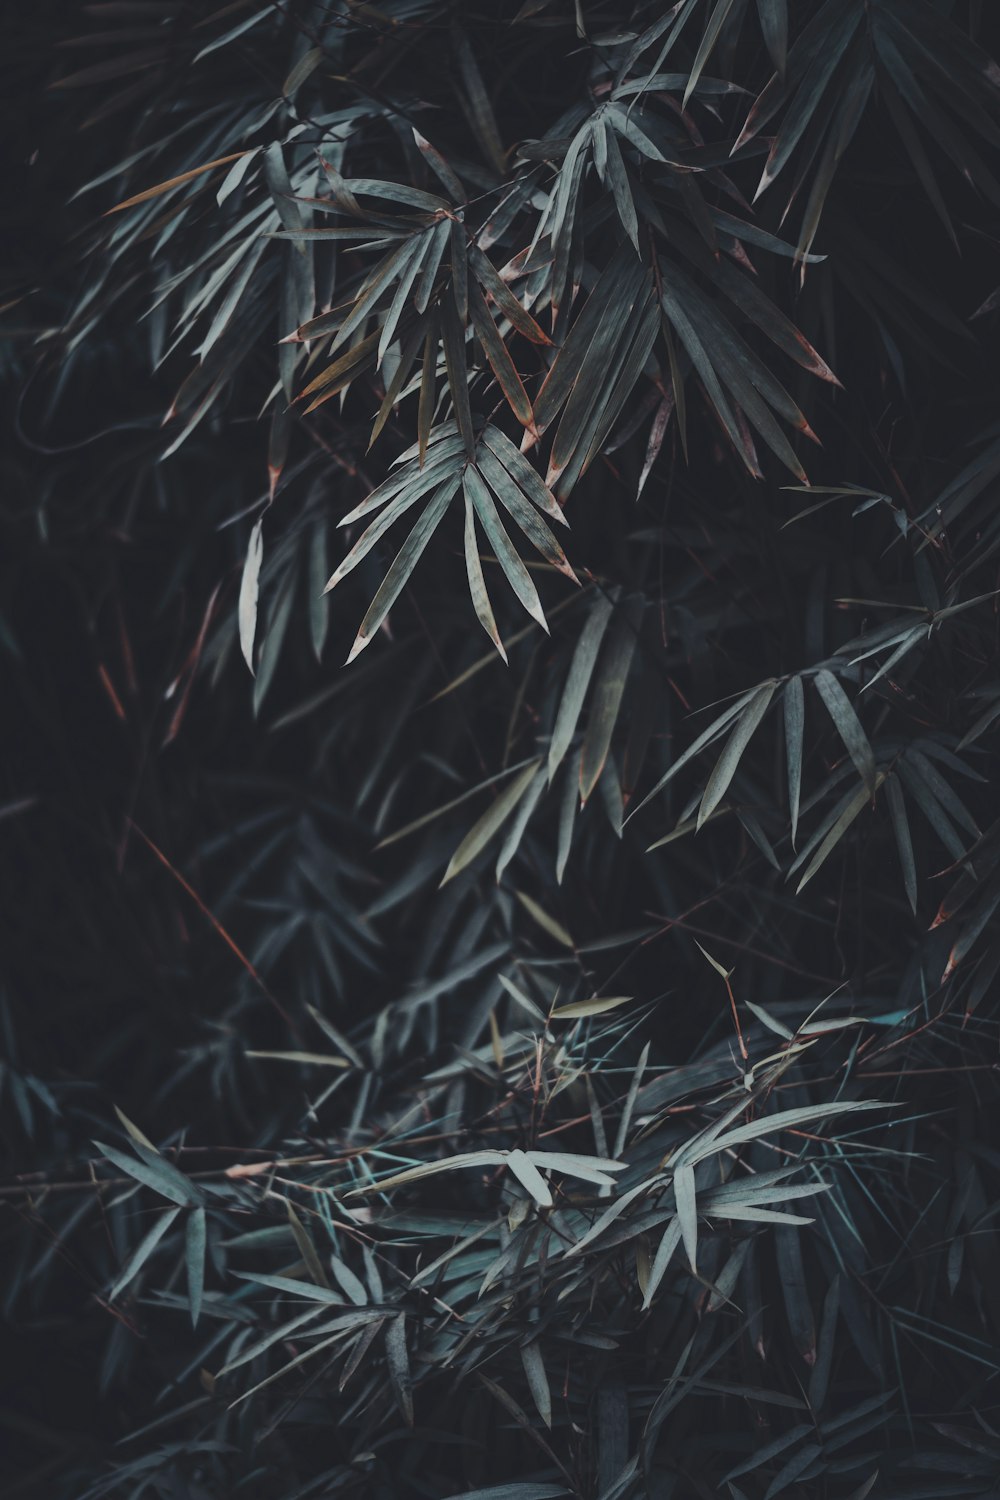 100 Moody Pictures Download Free Images On Unsplash Pngtree offers hd moody background images for free download. 100 moody pictures download free